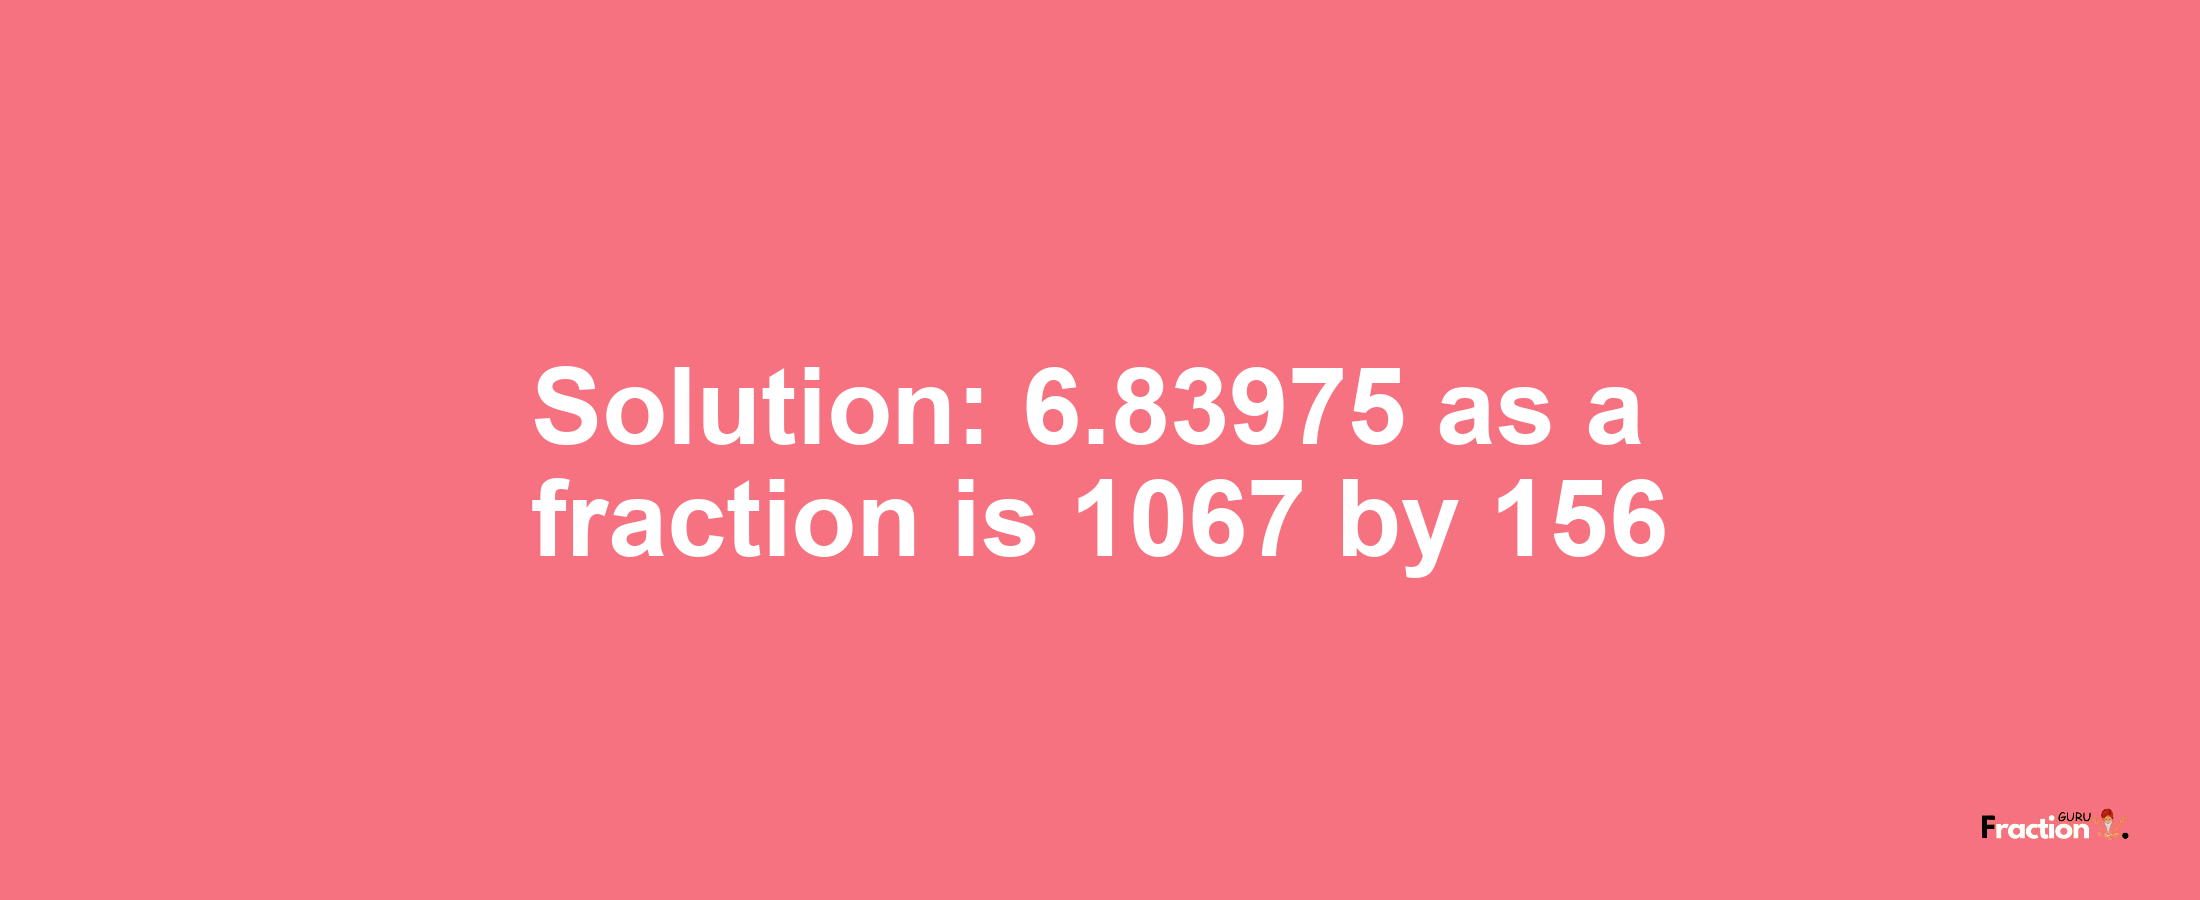 Solution:6.83975 as a fraction is 1067/156